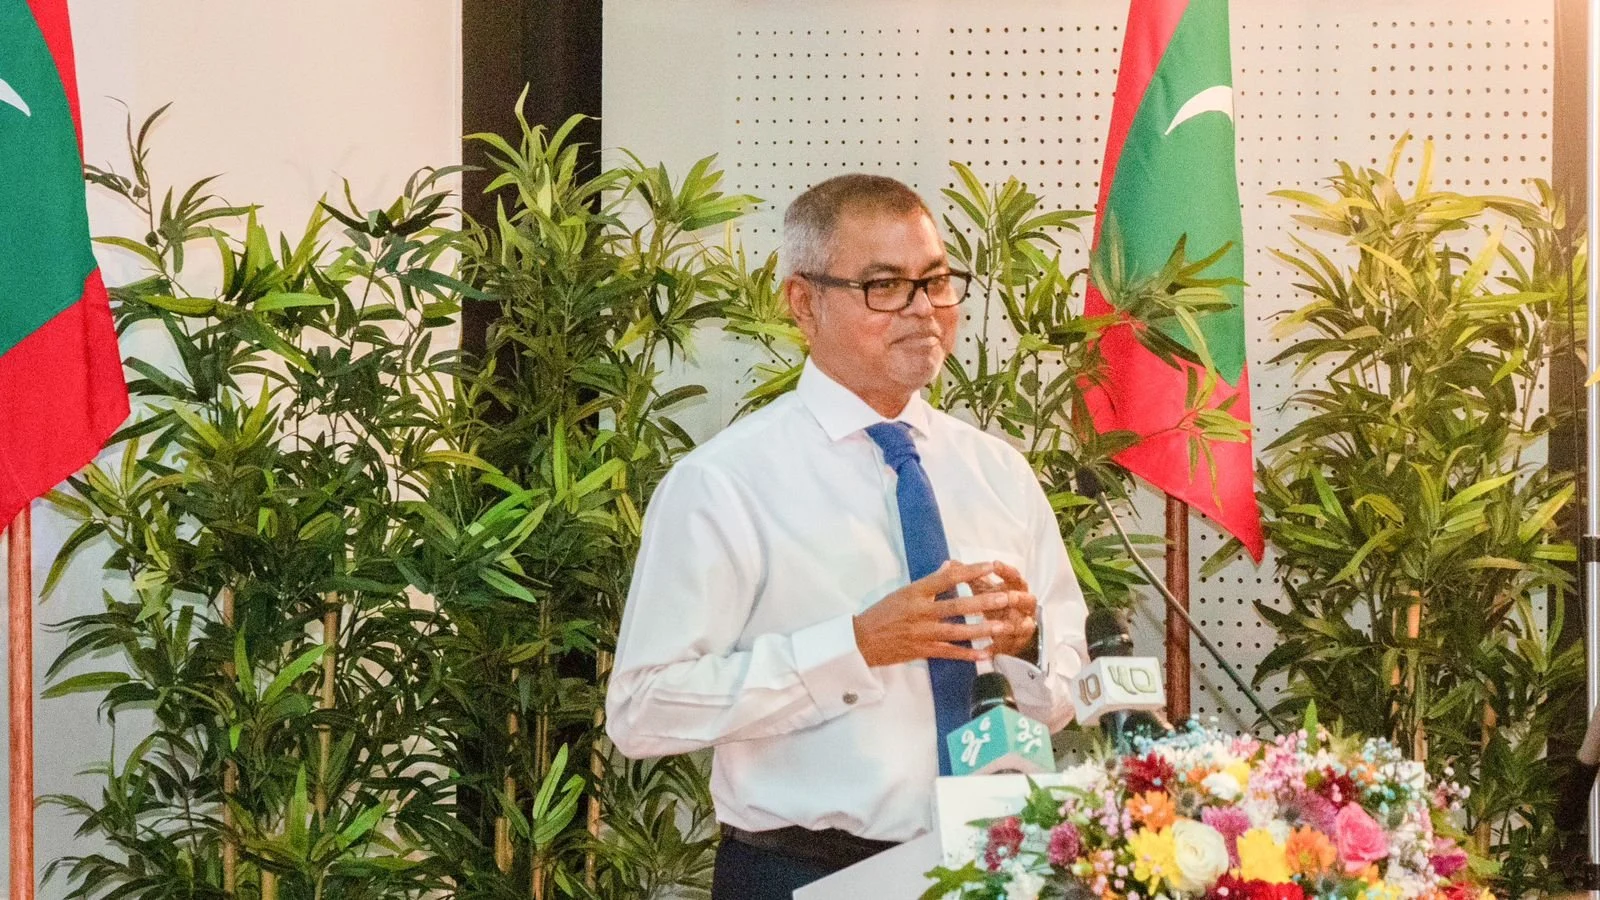 Maldives temporarily suspends dredging projects to protect coral reefs